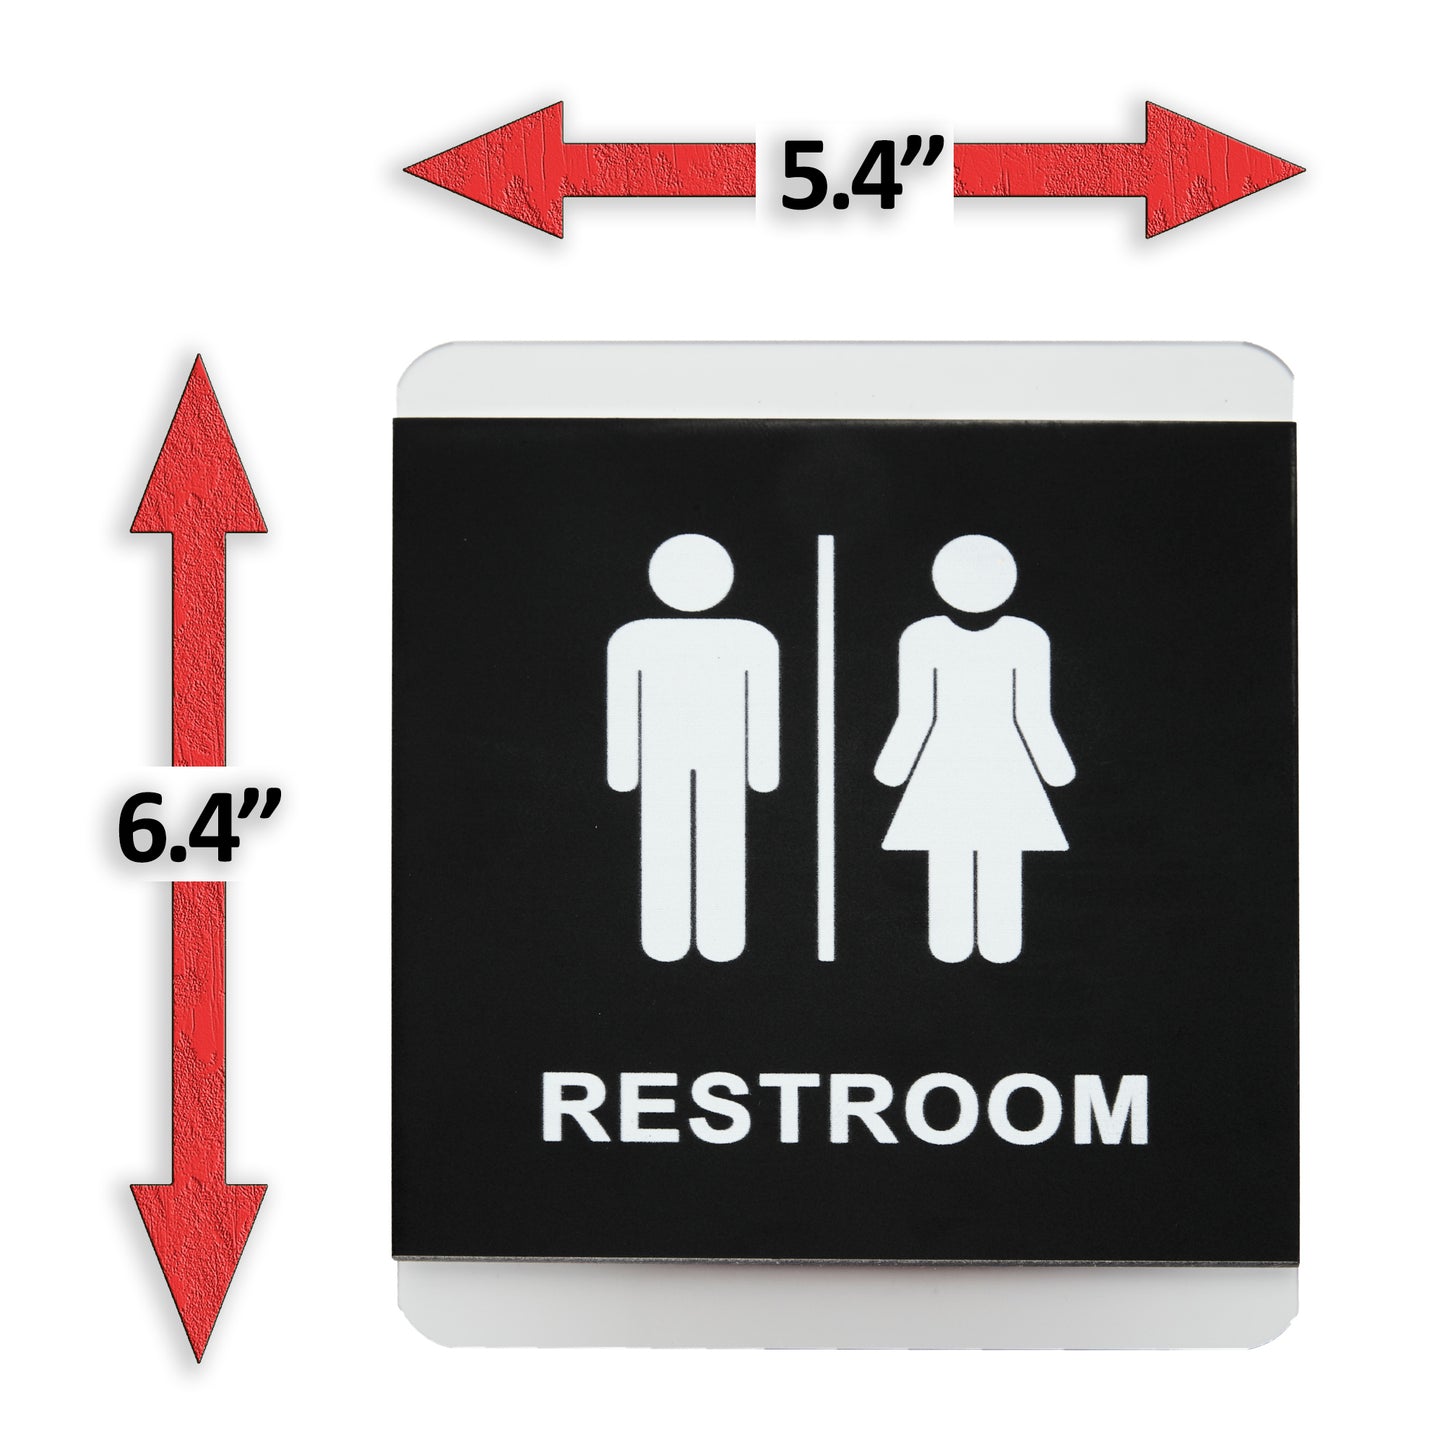 Toilet Bathroom Sign in 3D with Double-Sided Tape (UNISEX)